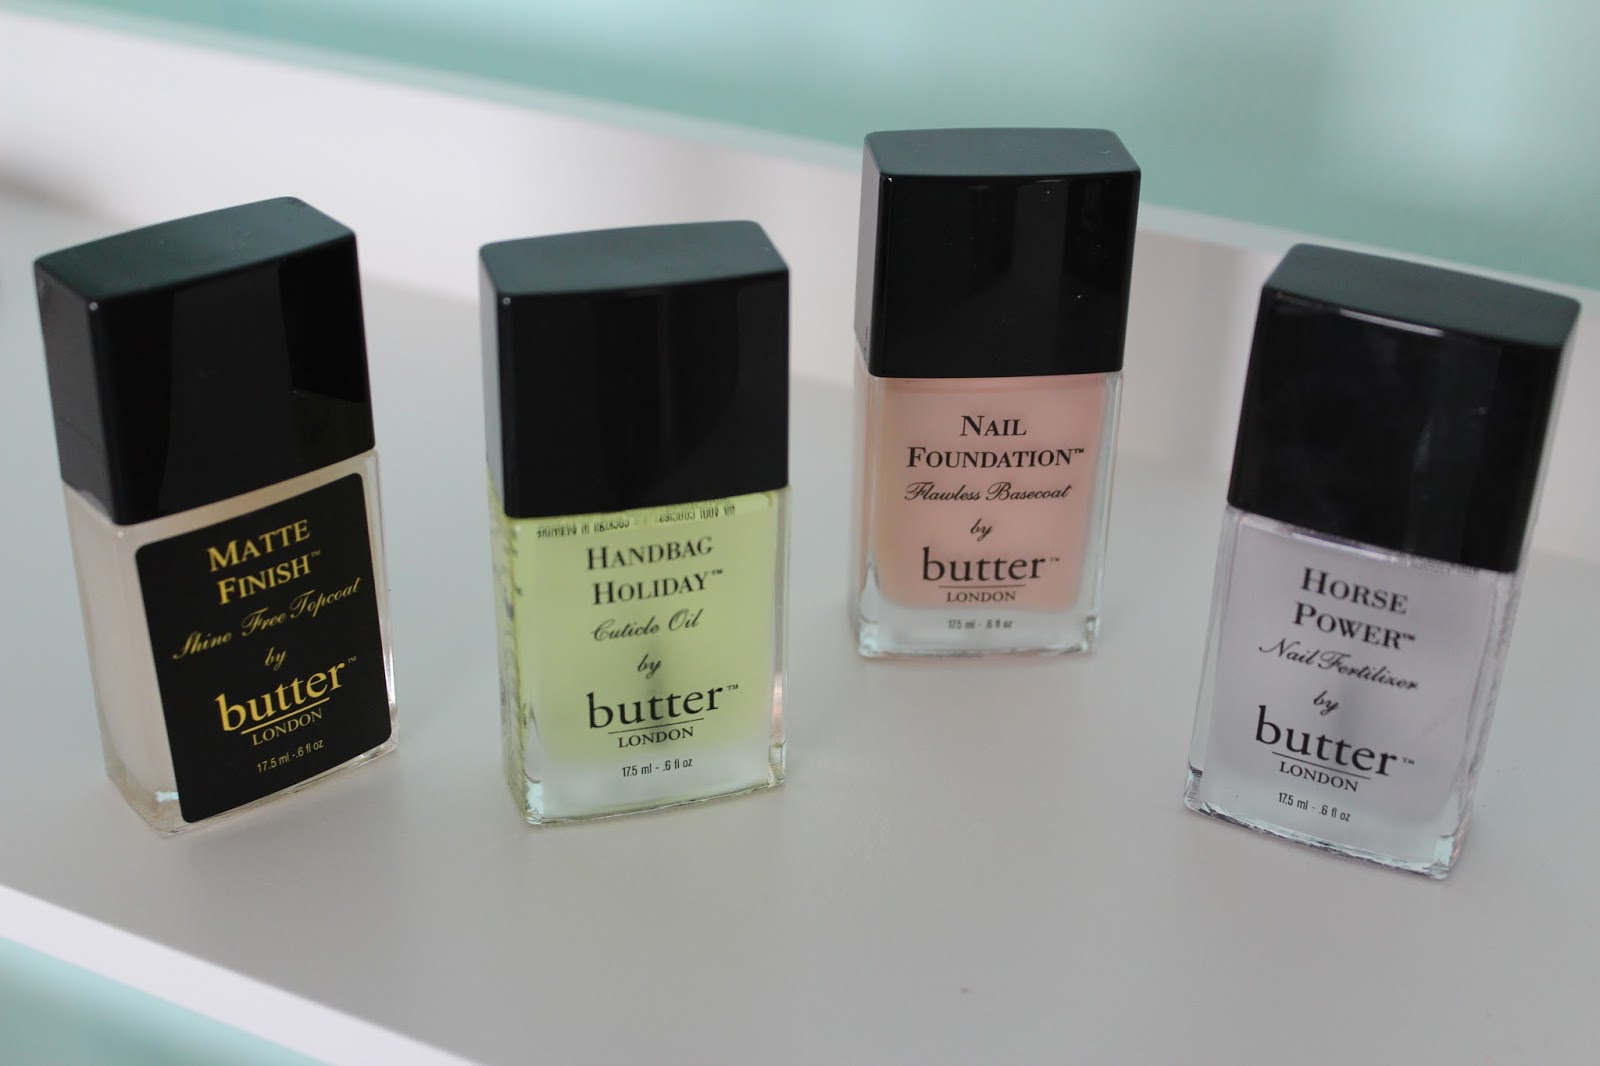 10. Butter London Nail Lacquer in "Cotton Buds" - wide 8